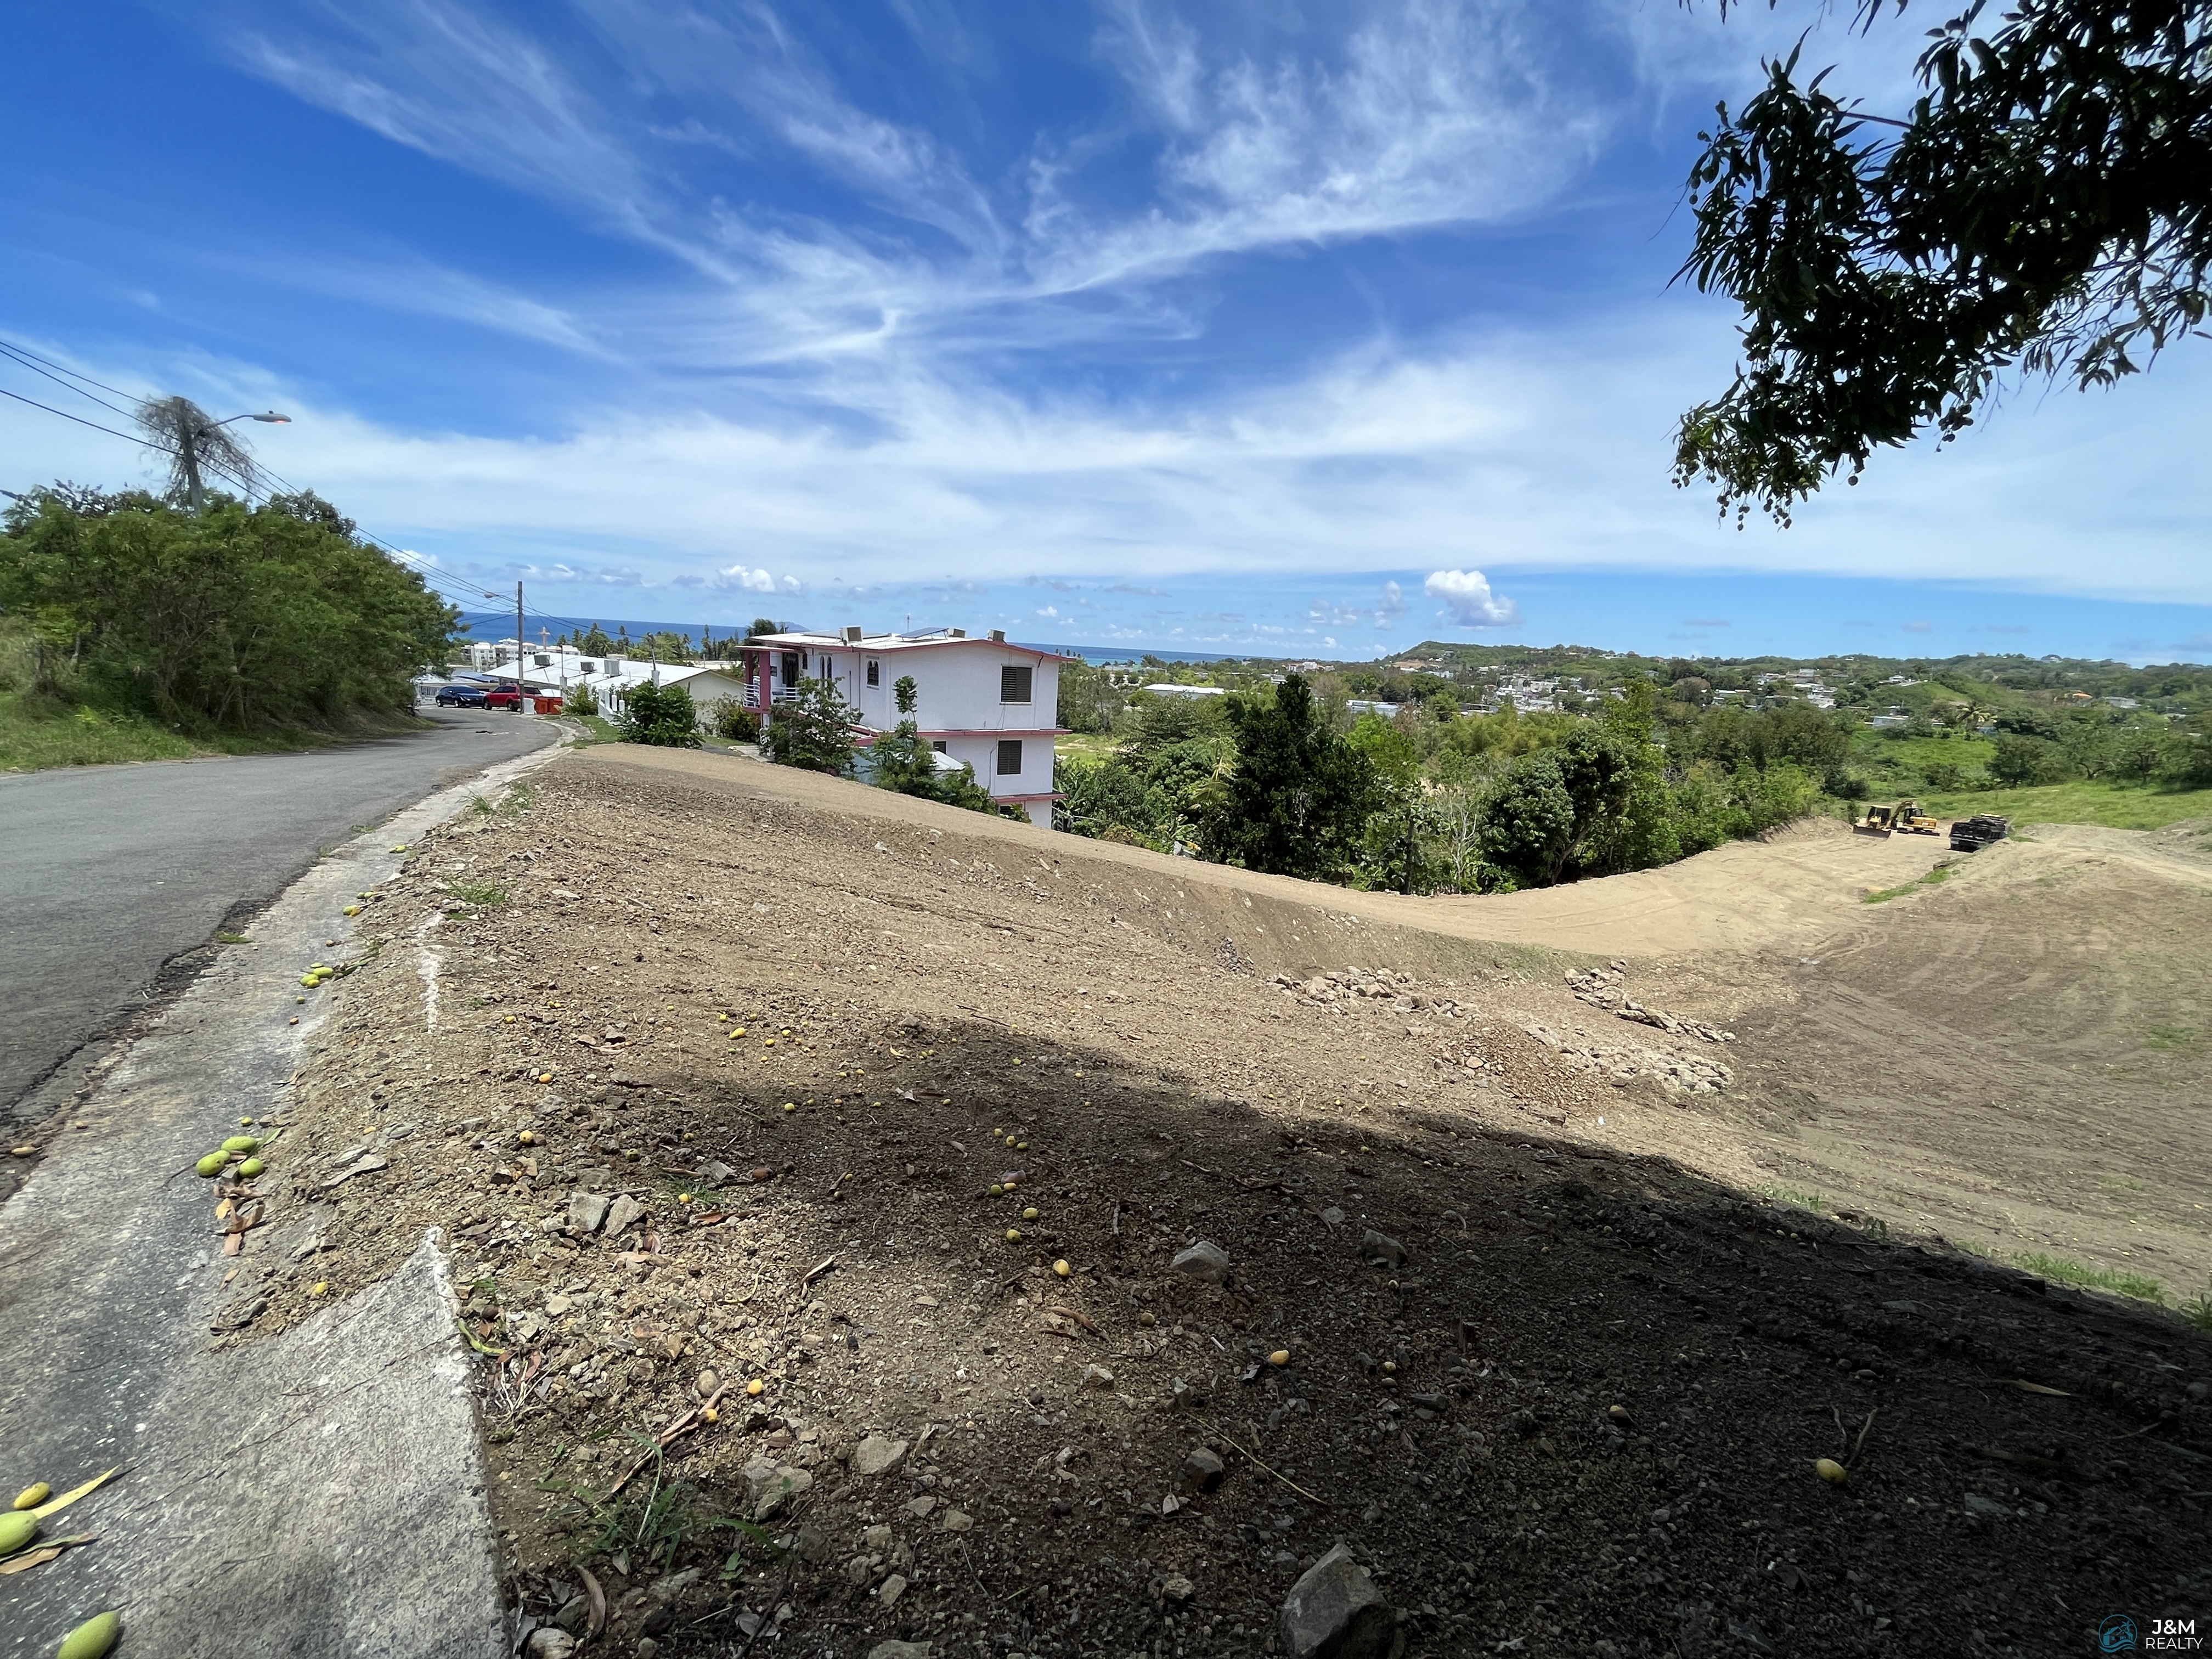 Lots for sale in Rincon